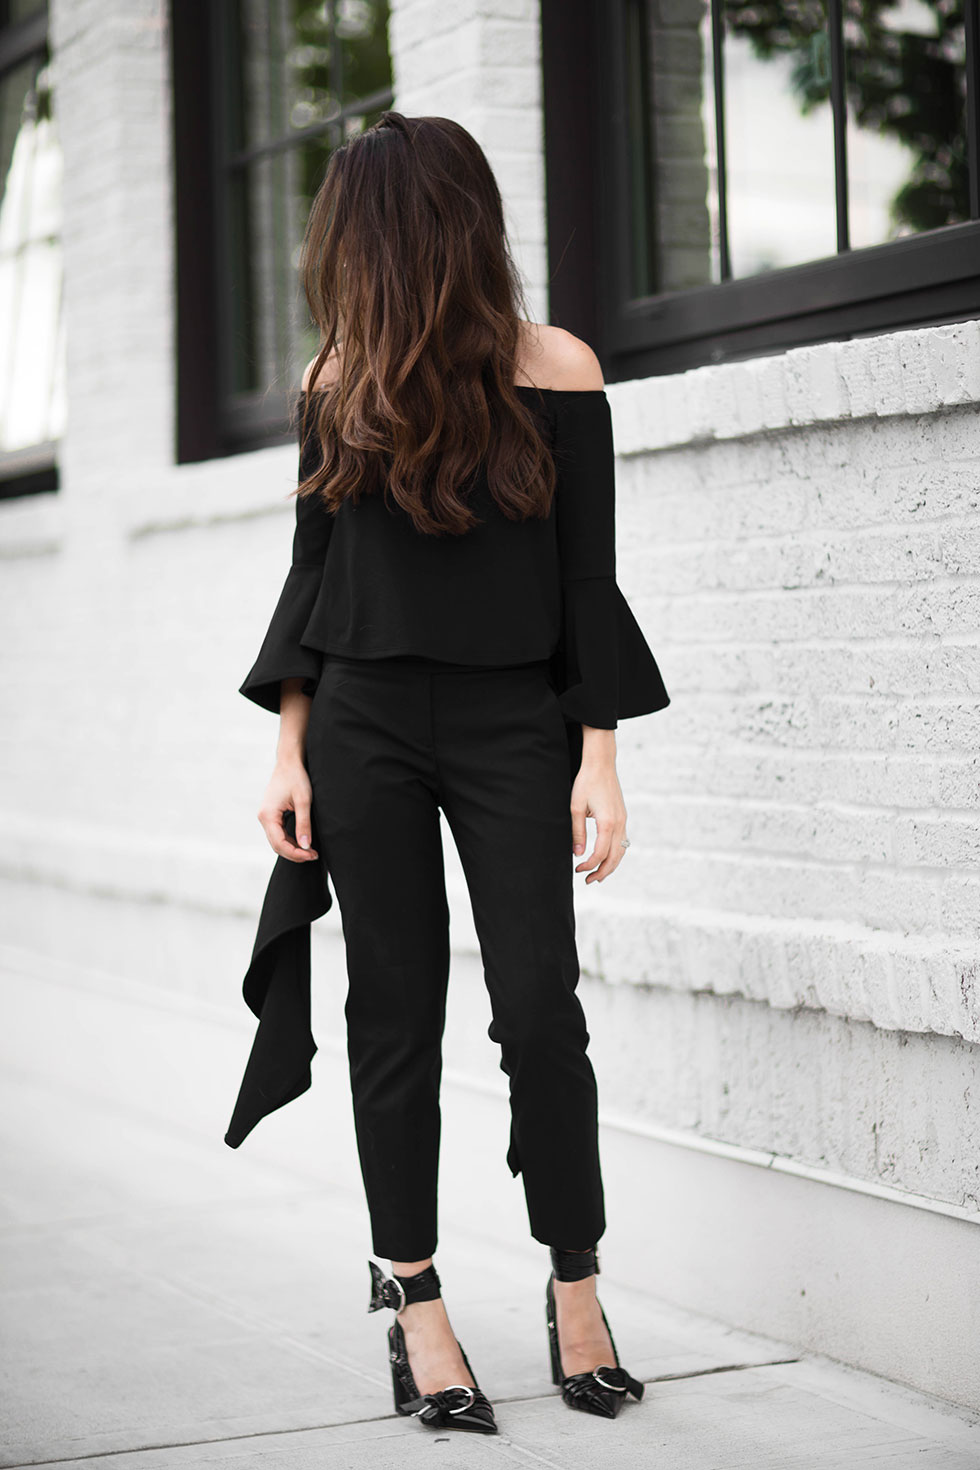 Your Not-So-Basic Guide to Rocking an Off-The-Shoulder Top -- ELLERY RUFFLE SLEEVE OFF-SHOULDER TOP, Dior Black patent calfskin slingback pump Line from the Summer 2016 catwalk show, All Black Outfit